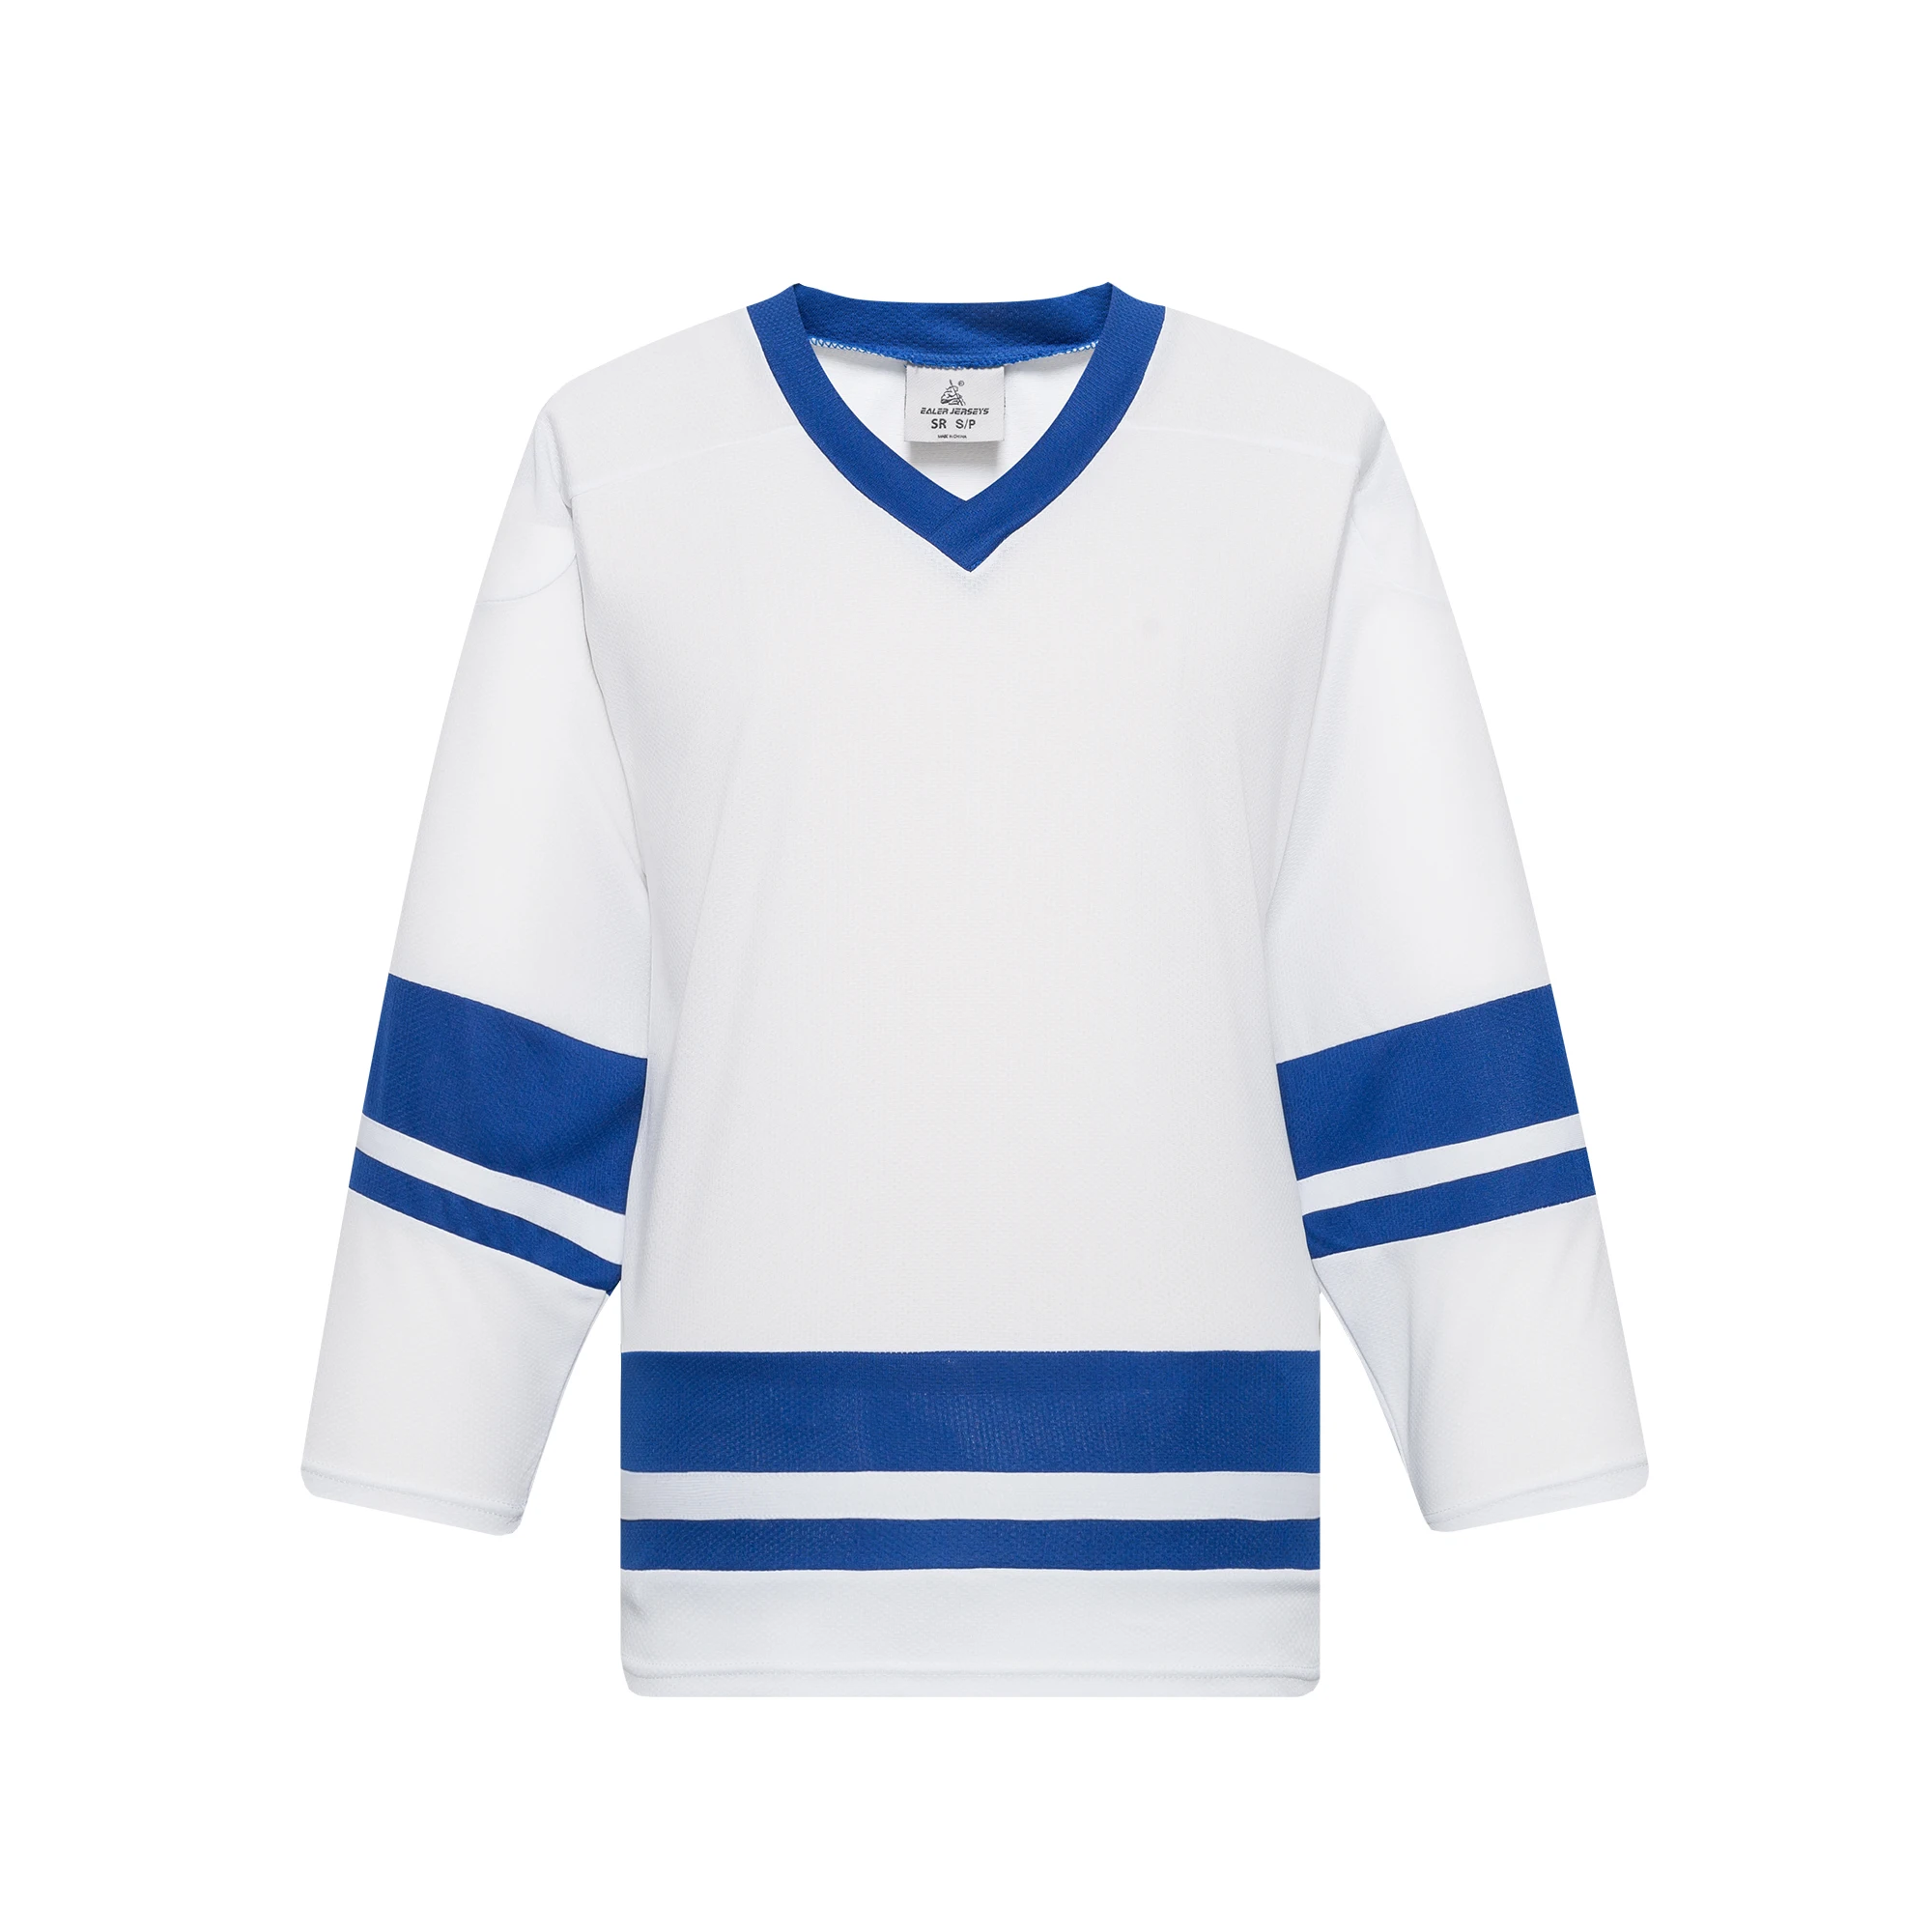 A Blank Blue Hockey Jersey Has Red And White Stripes High-Res